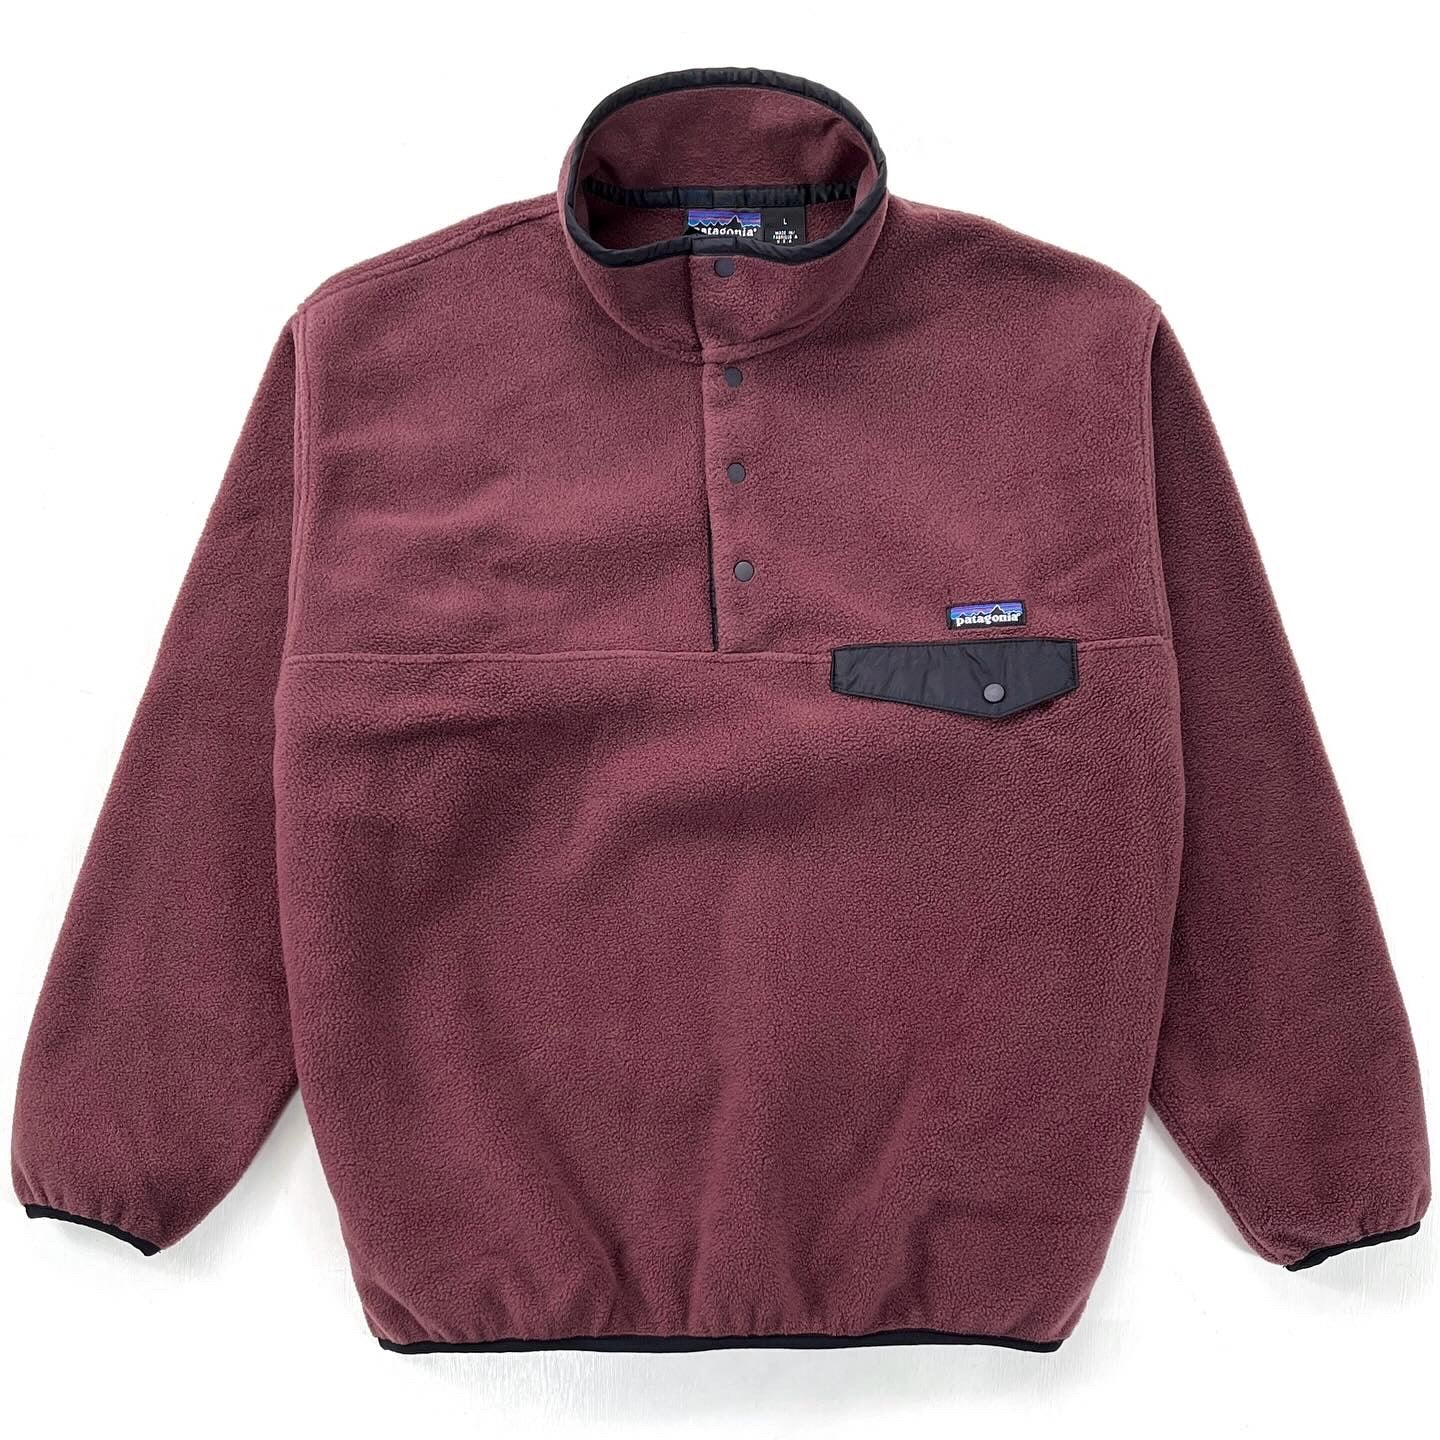 2001 Patagonia Made In The U.S.A. Synchilla Snap-T, Balsamic (L)